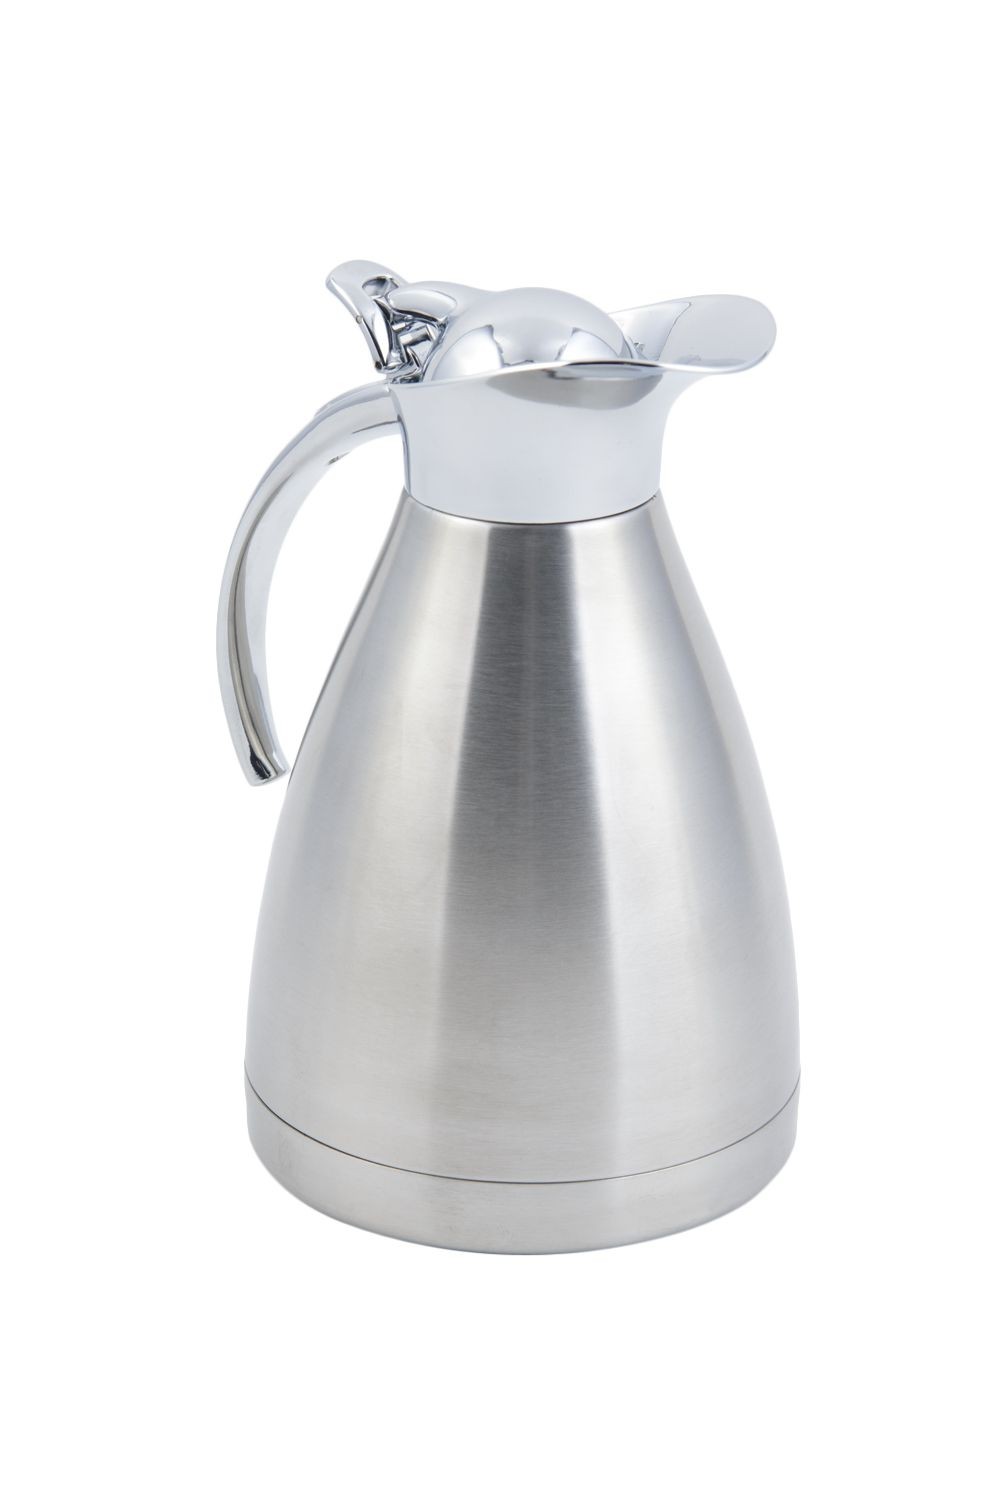 Choice 64 oz. Insulated Thermal Coffee Carafe / Server with